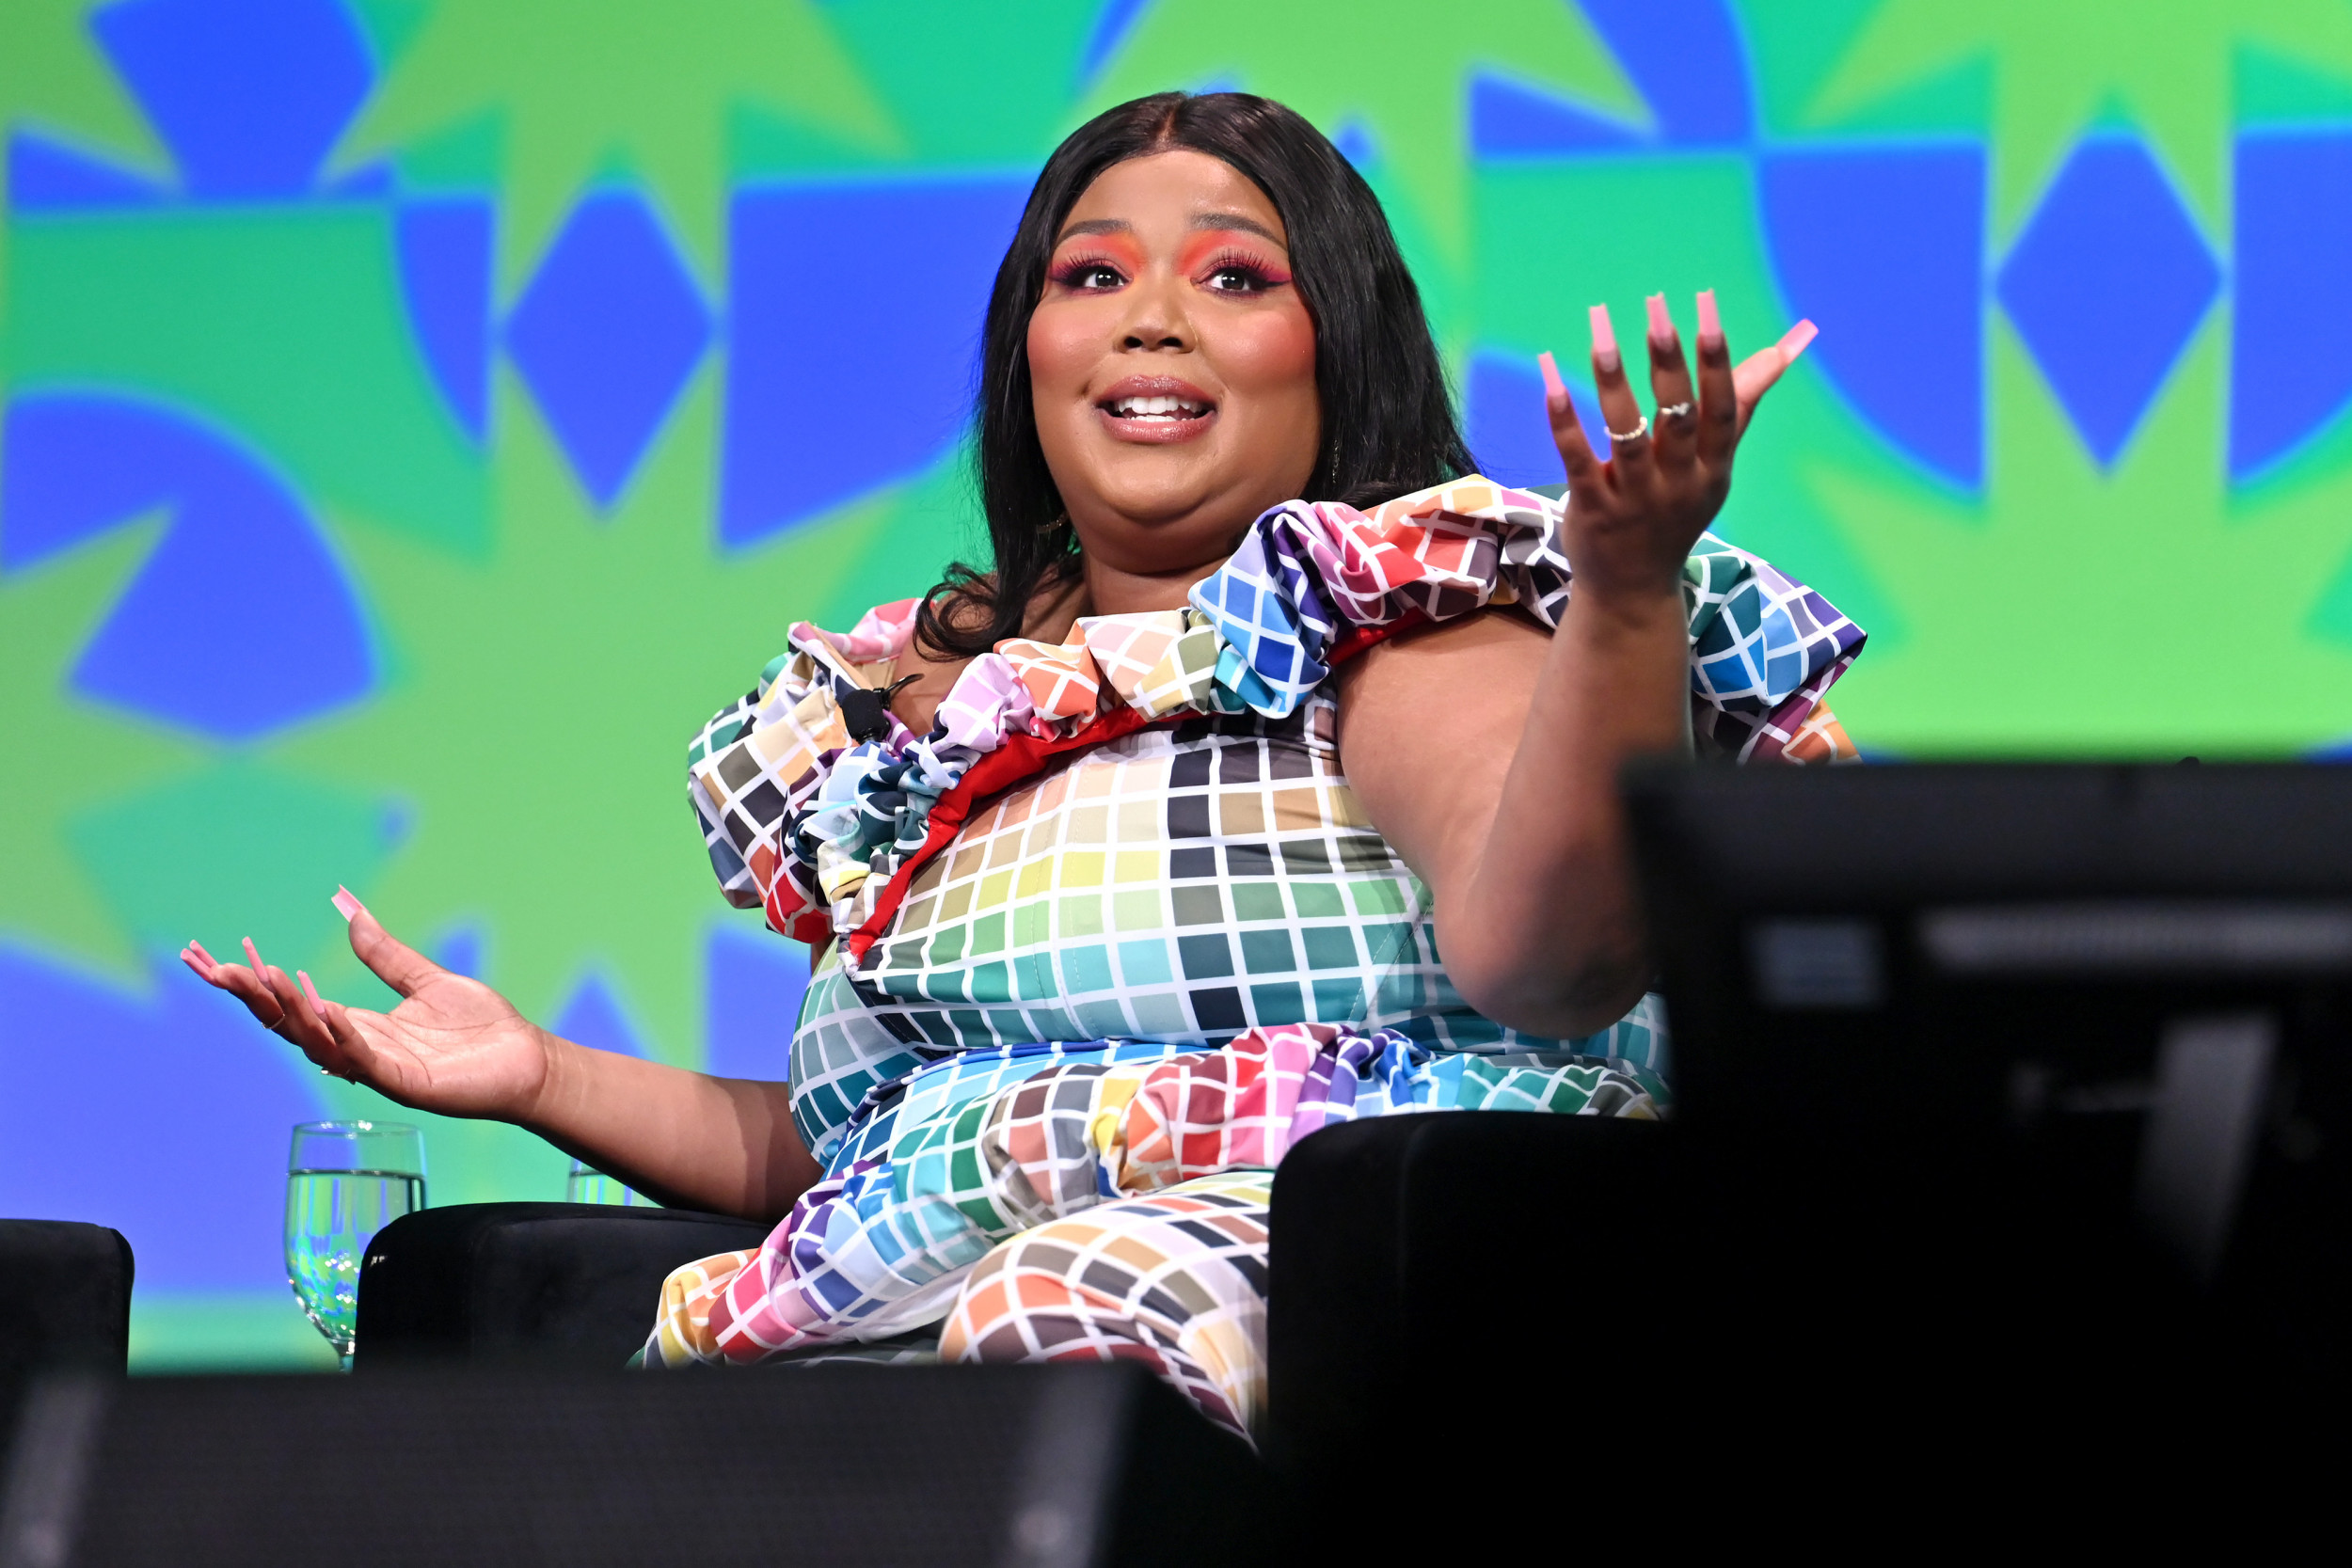 Why Lizzo’s New Song ‘GRRRLS’ Is Being Called ‘Ableist’: ‘Do Better’